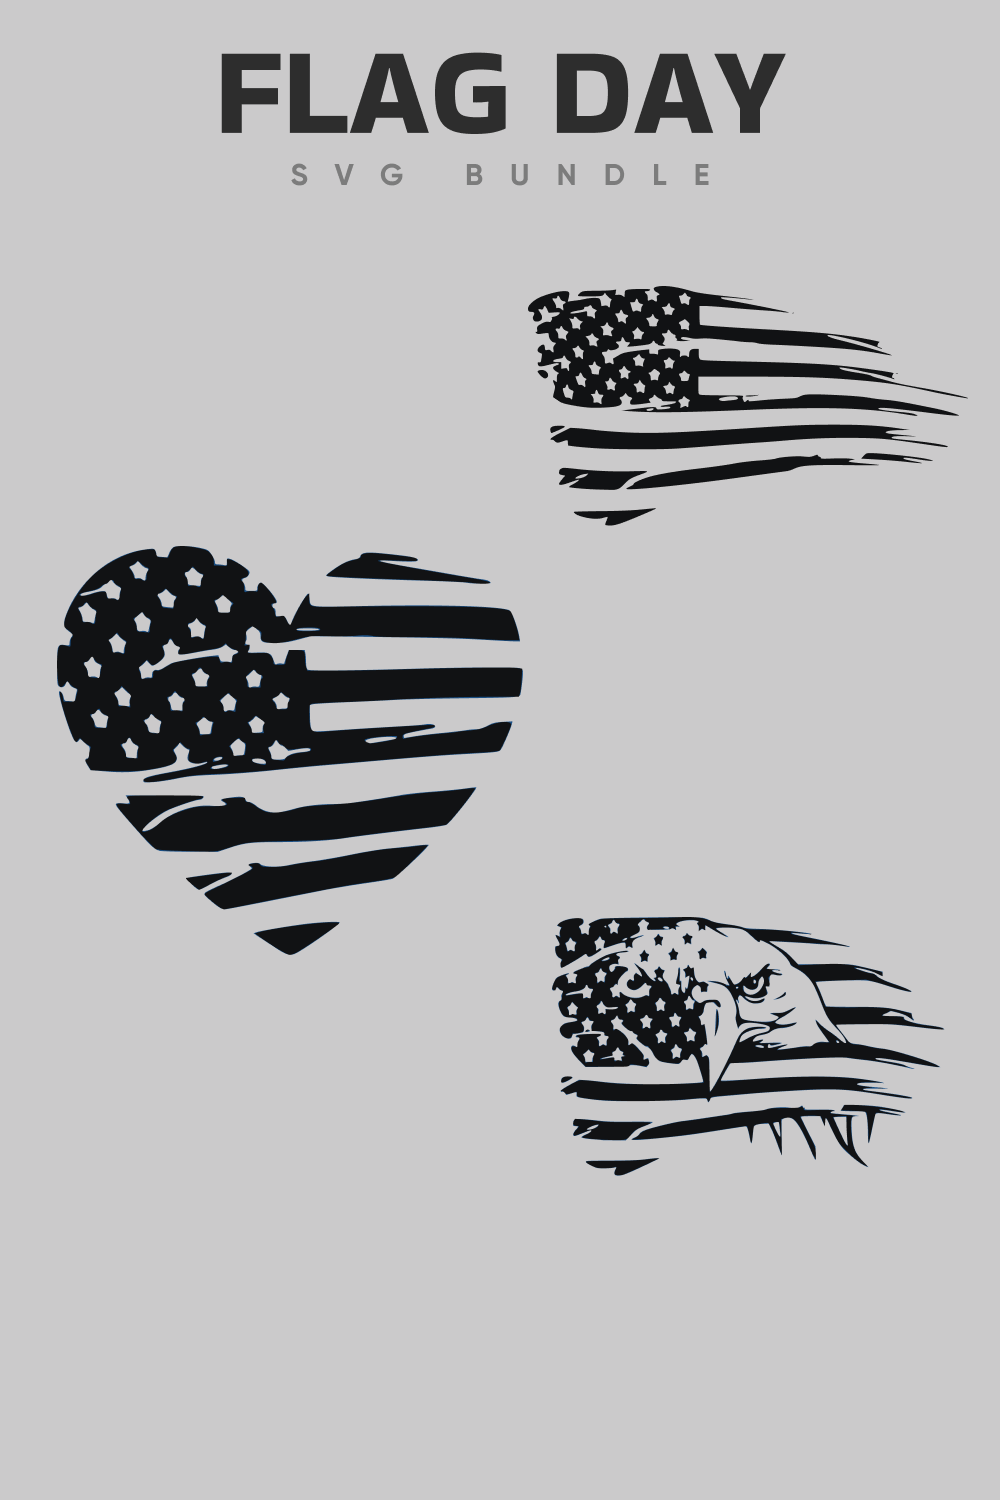 Image of the flag in black and white.